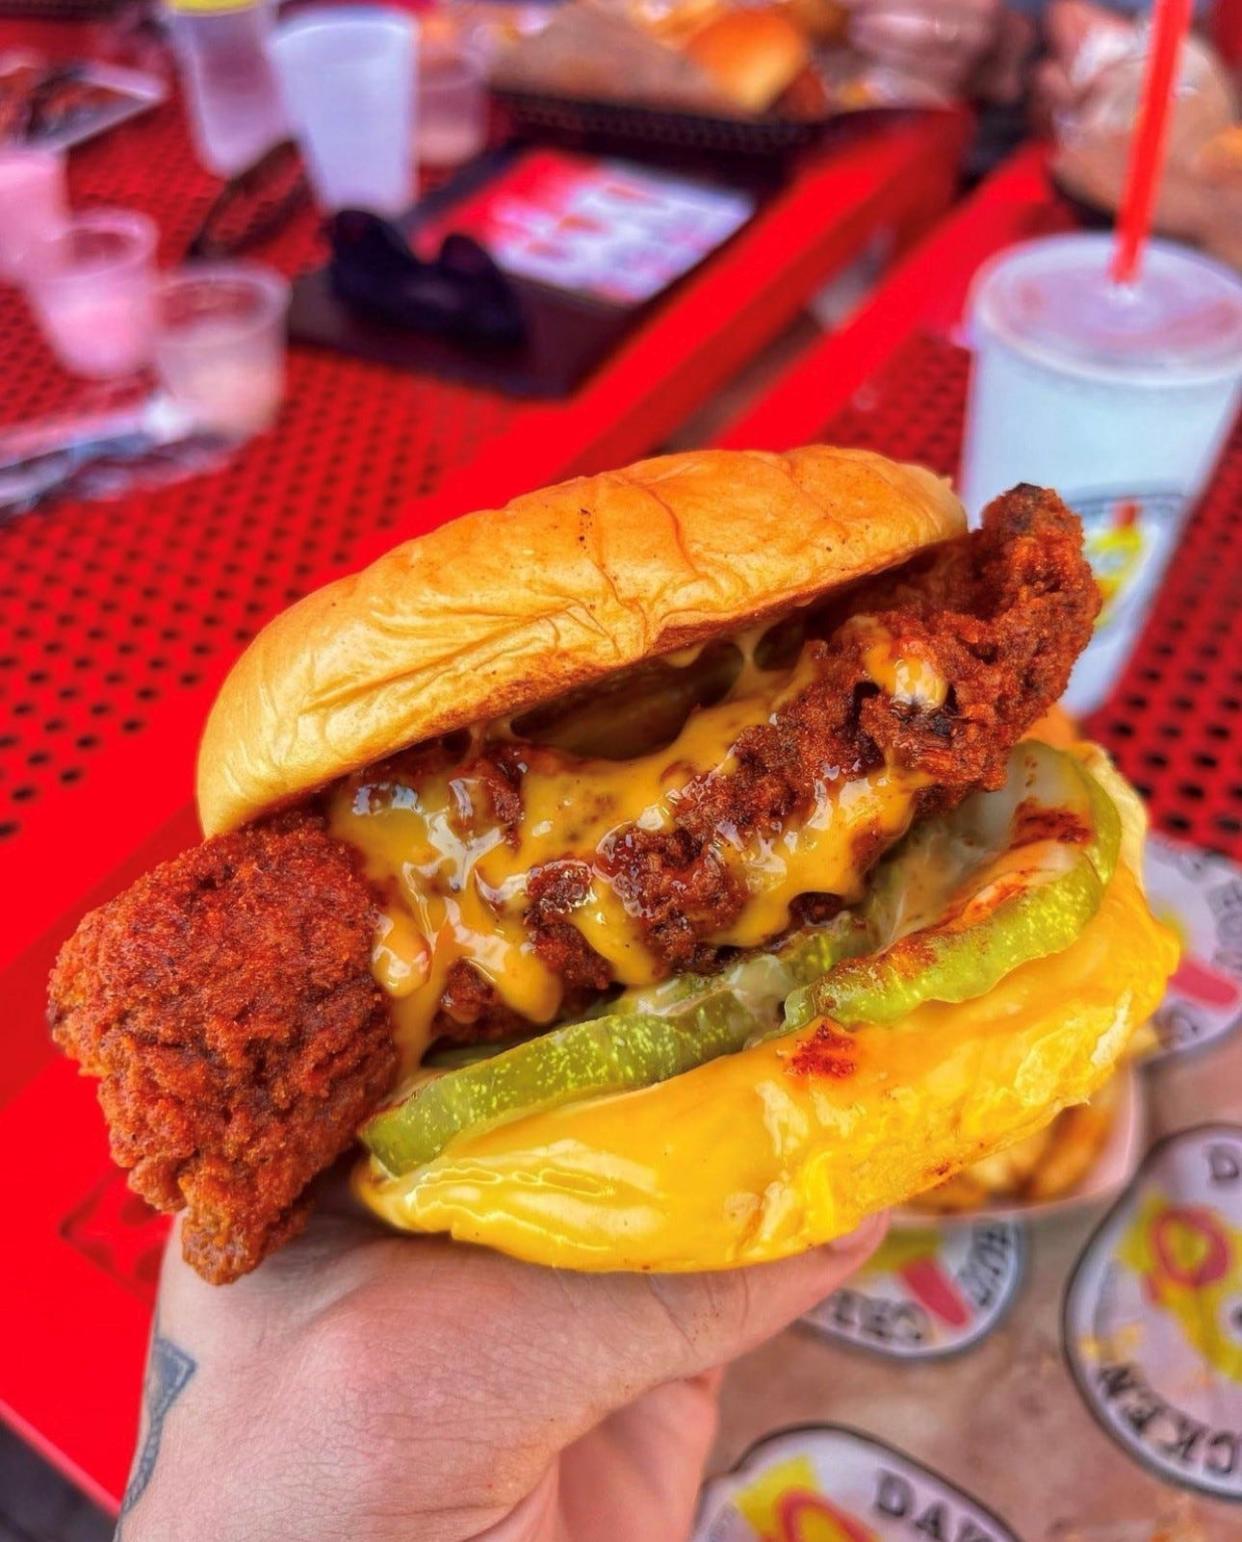 Dave's Hot Chicken is handing out free chicklen sliders on Tuesday, Oct. 24.